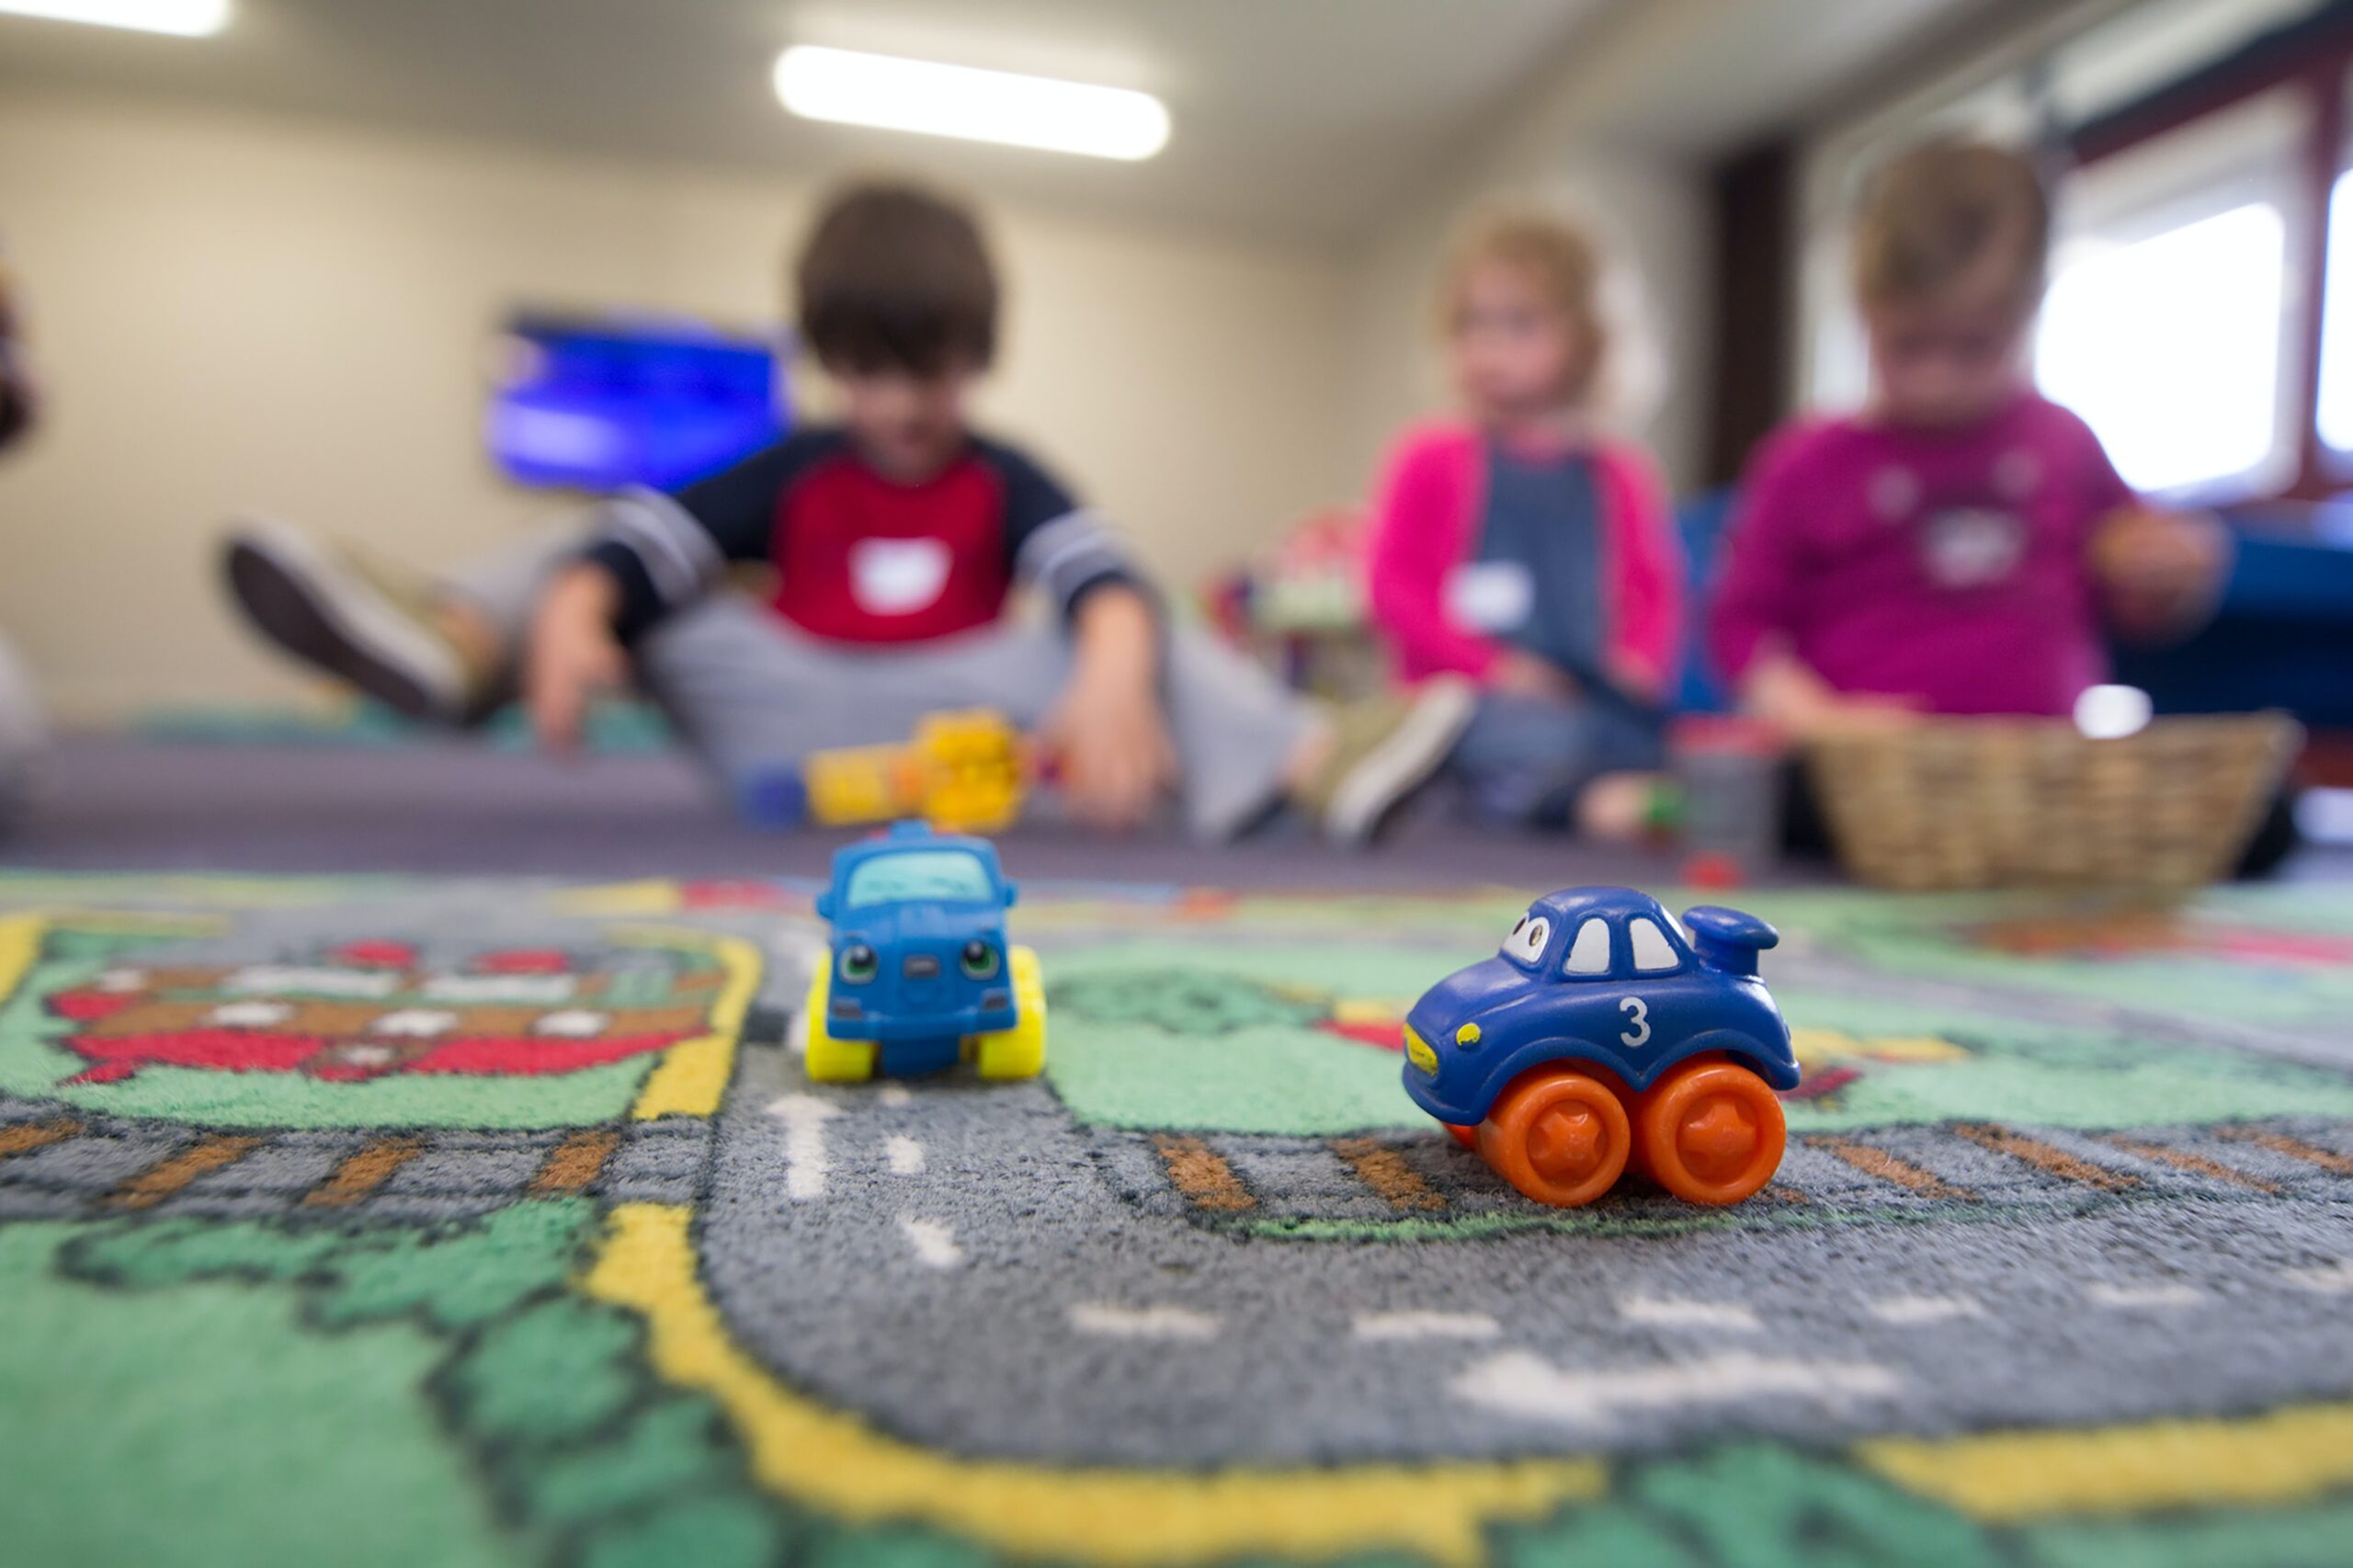 3 preschoolers play on the floor with toy vehicles. The colorful rug shows a road with 2 toy trucks on it.